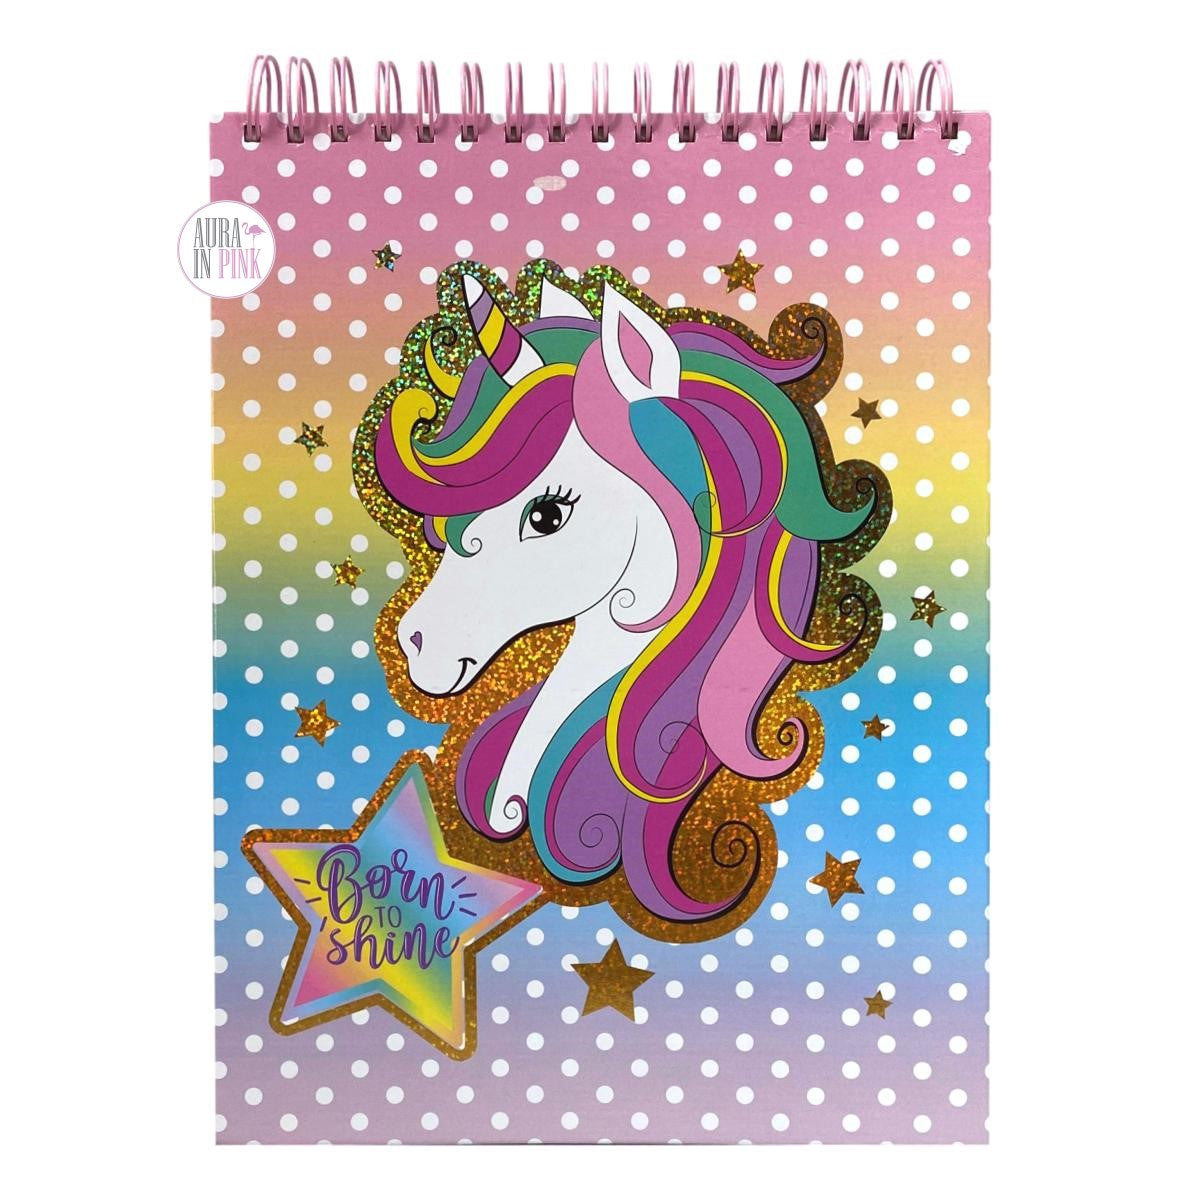 Tatum: A Cute Unicorn Sketchbook (8.5 x 11) inches 110 pages With